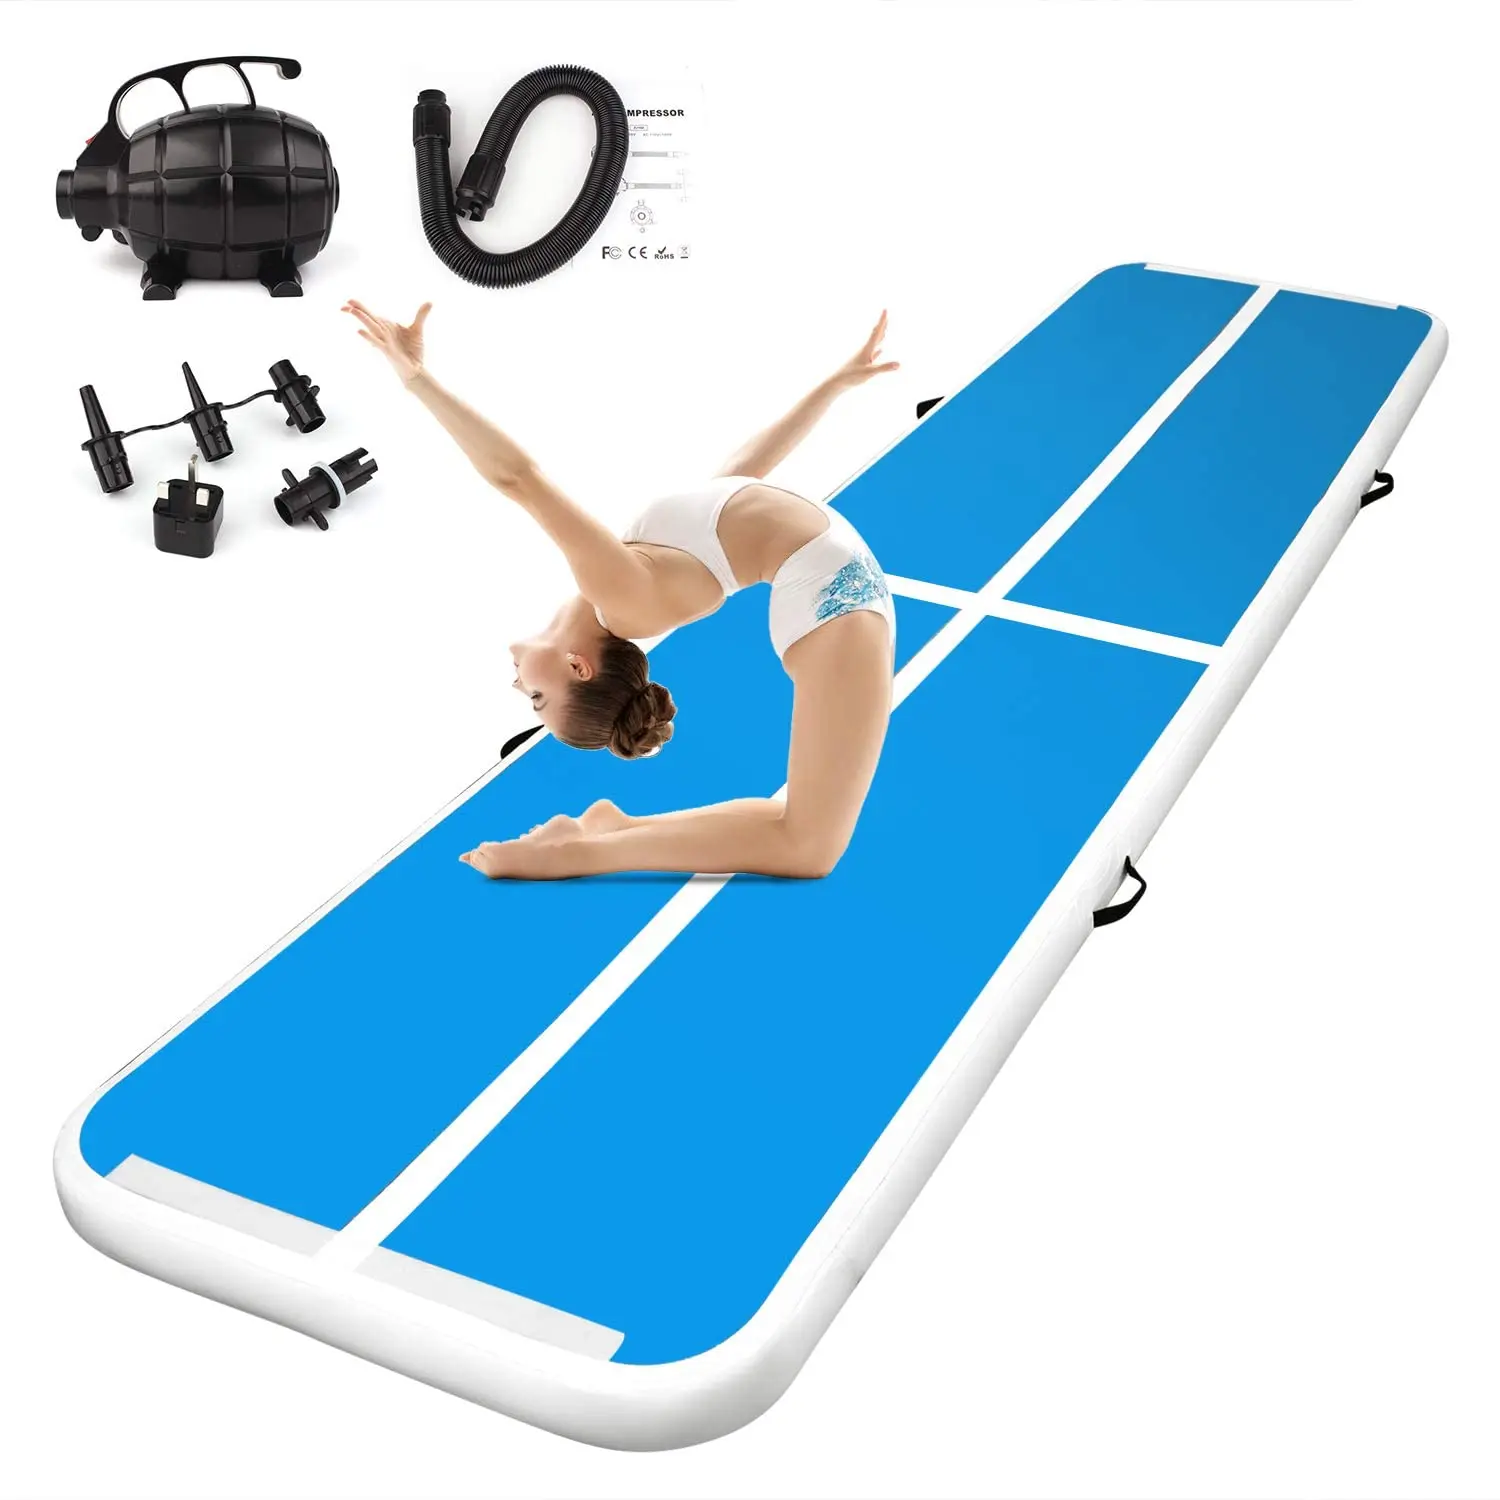 

Free Shipping 5x1x0.1m Gymnastic Mats Inflatable Air Track Airfloor For Gym Training For Sale